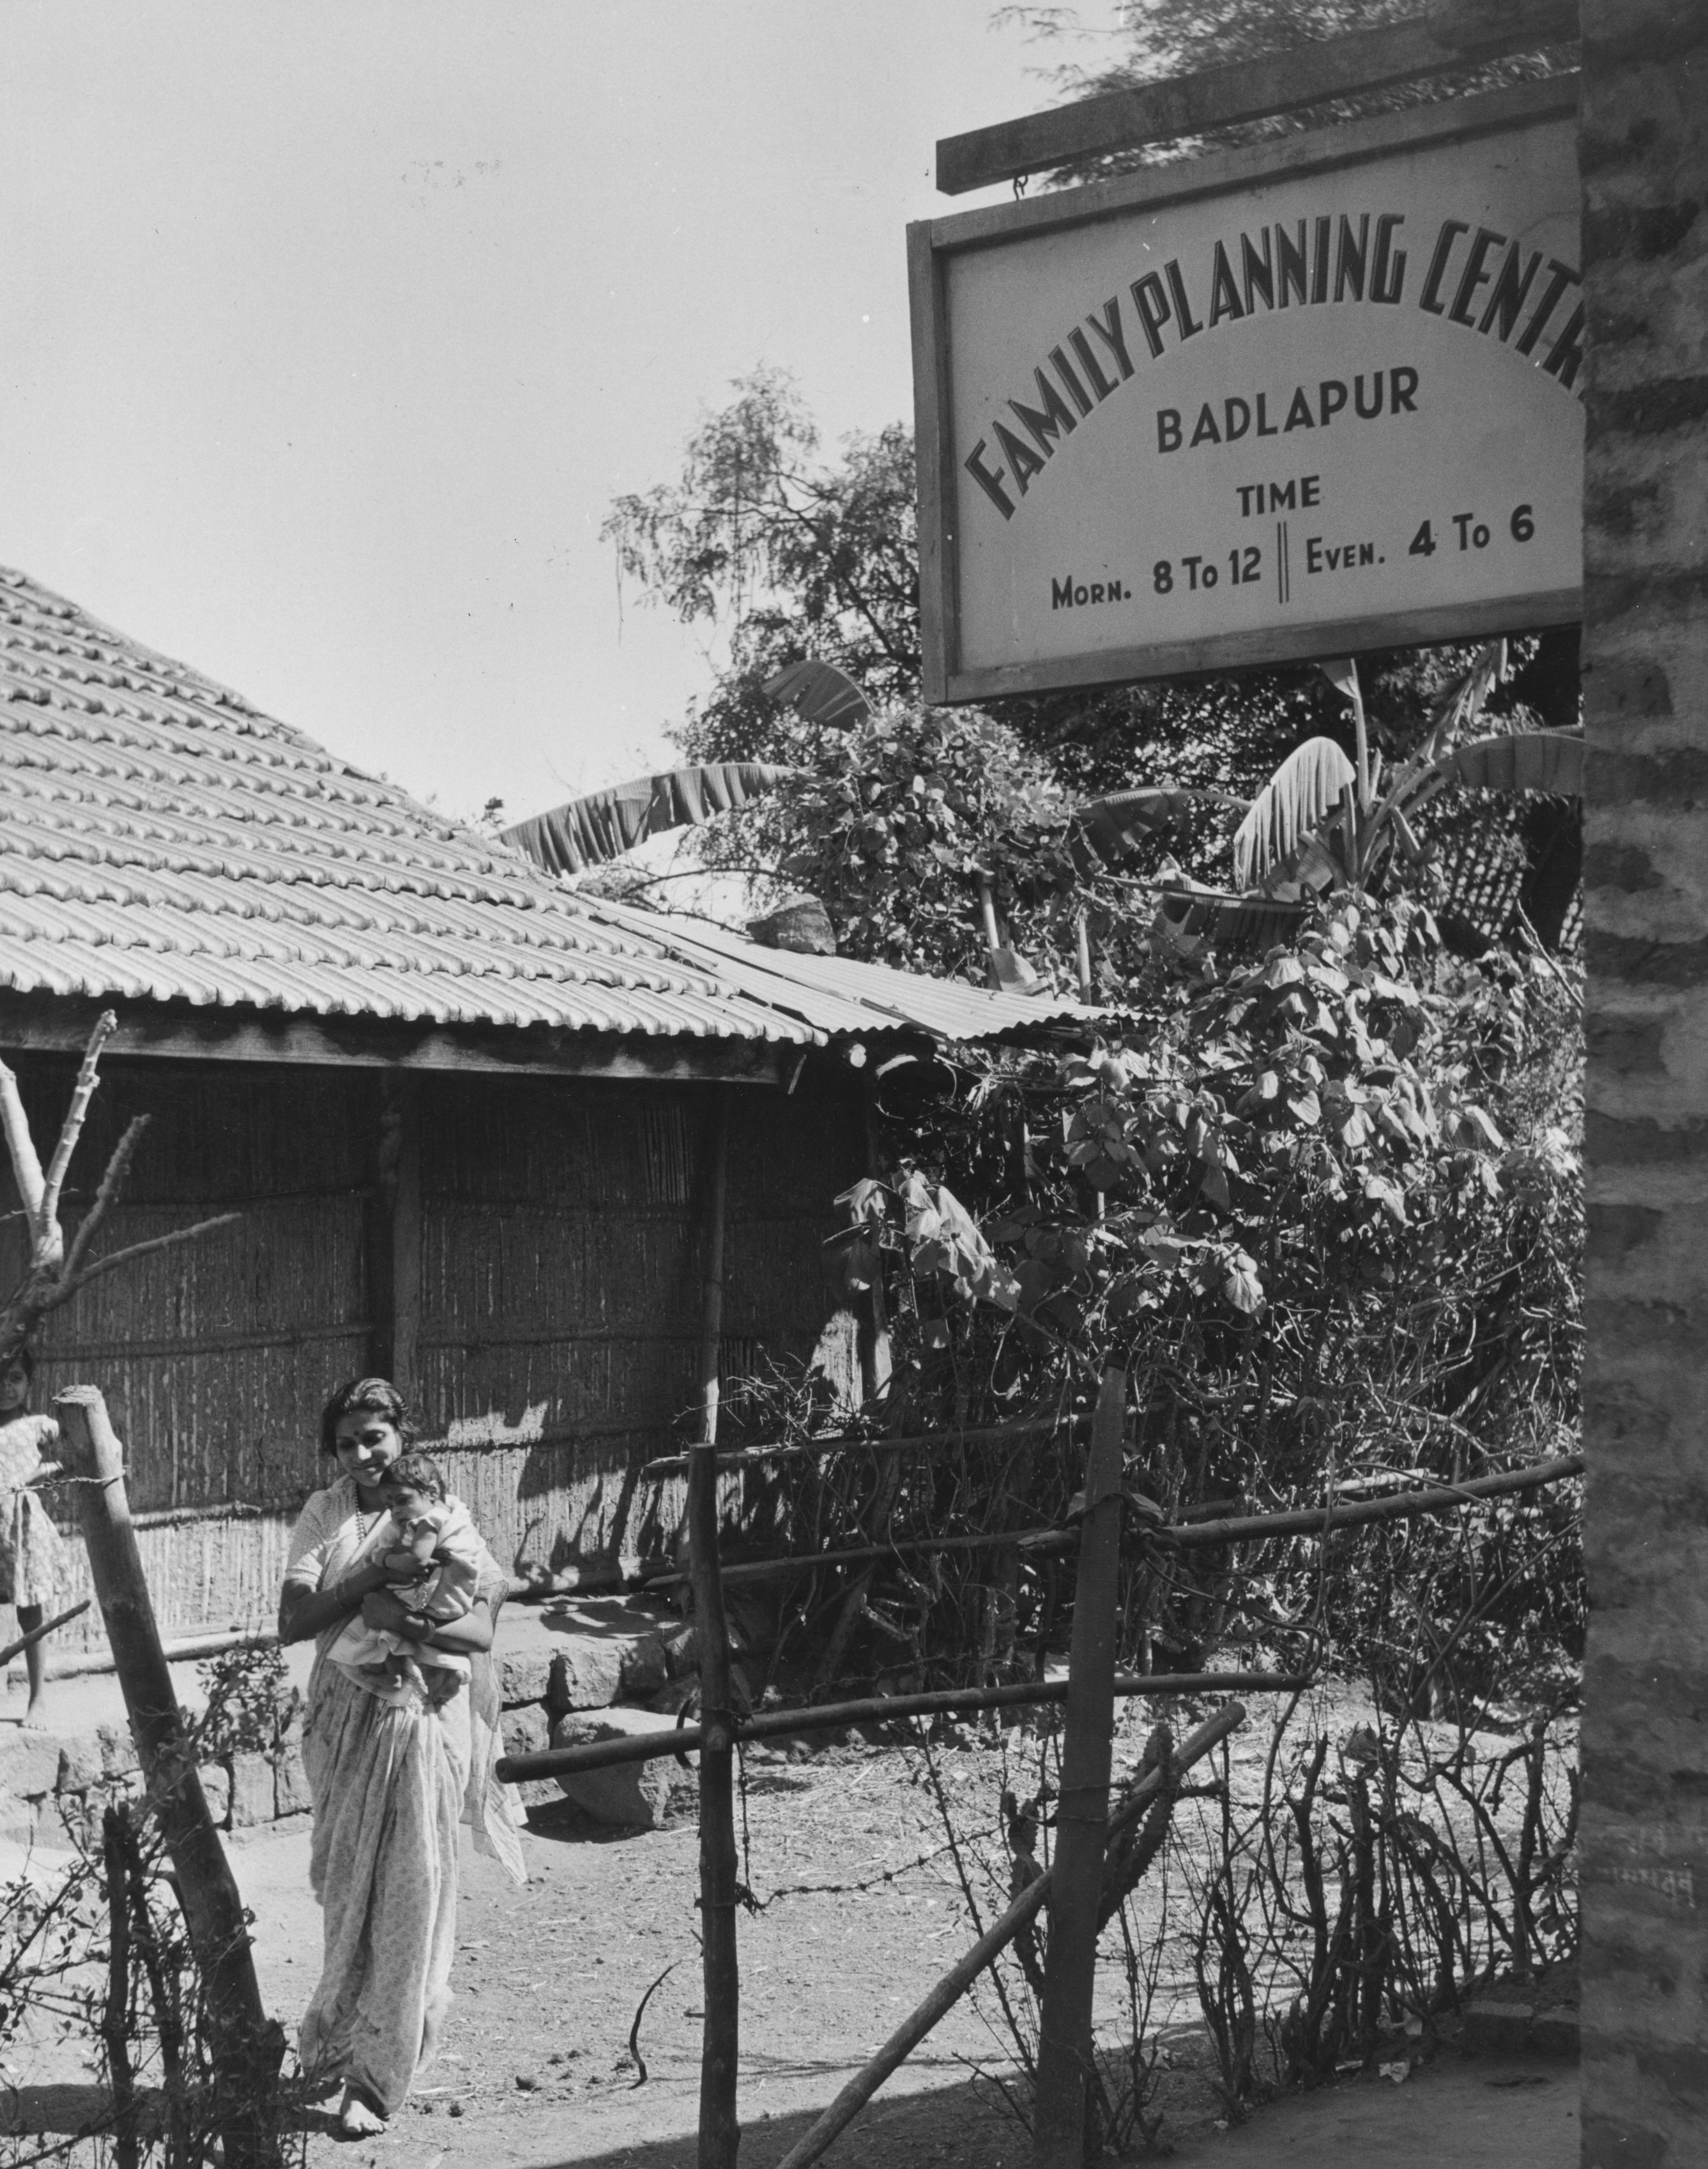 A woman carries a baby outside the family planning center in the village of Badlapur in 1954.